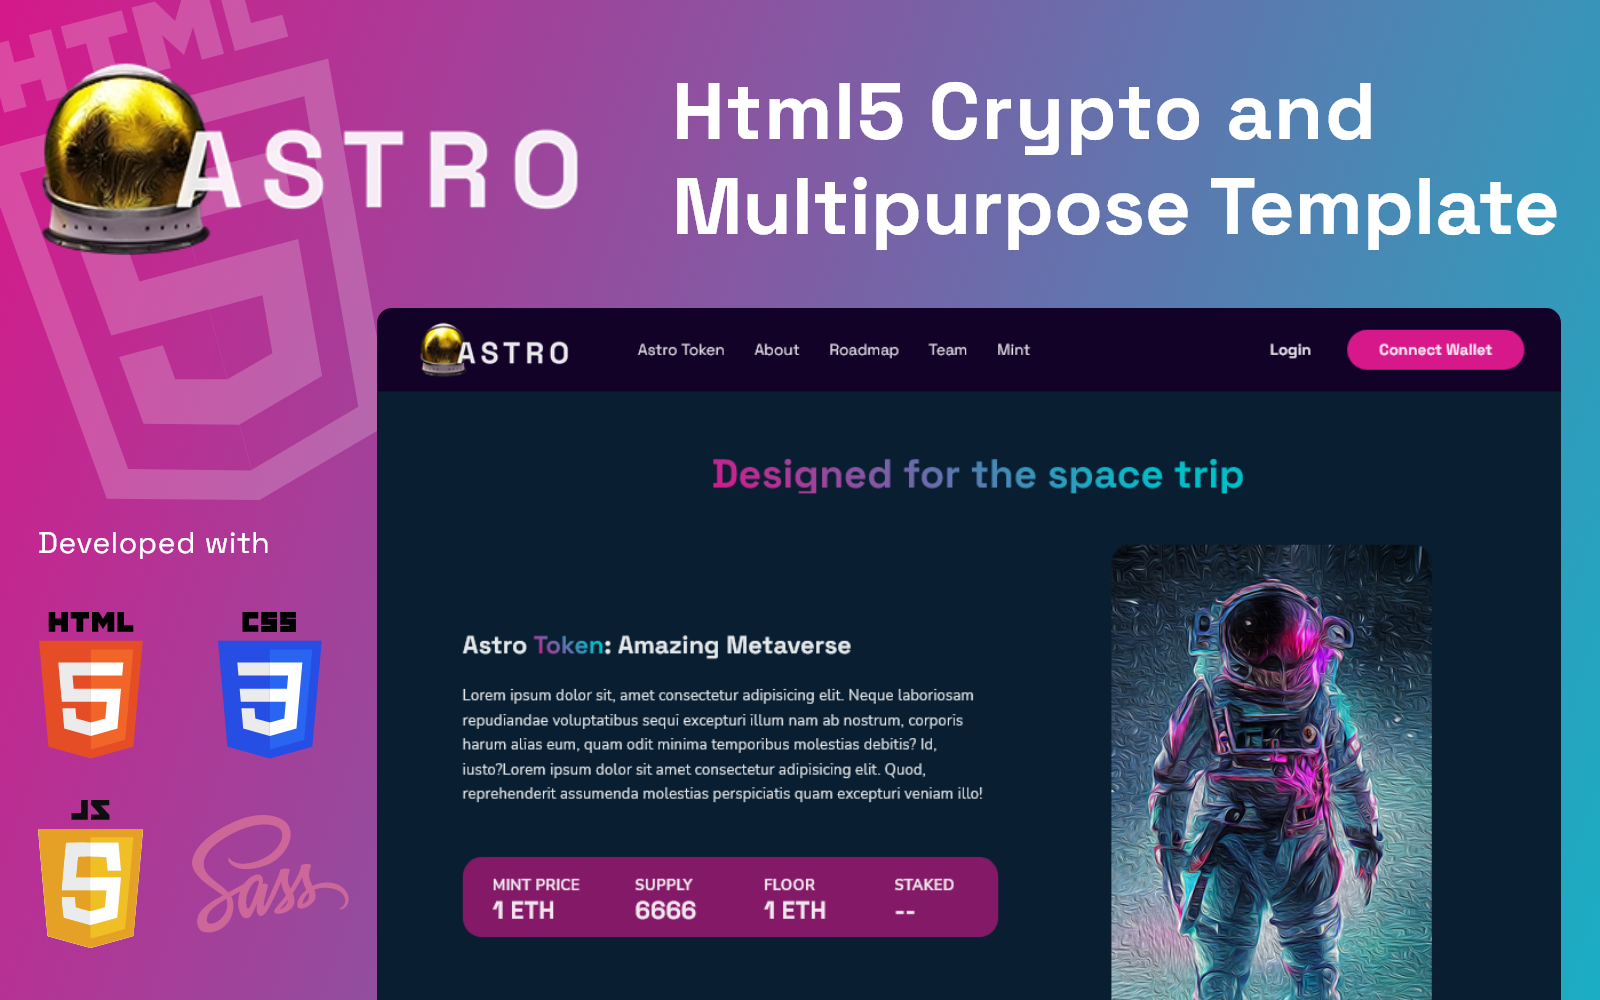 ASTRO Html Crypto NFT and Multipurpose Website Template